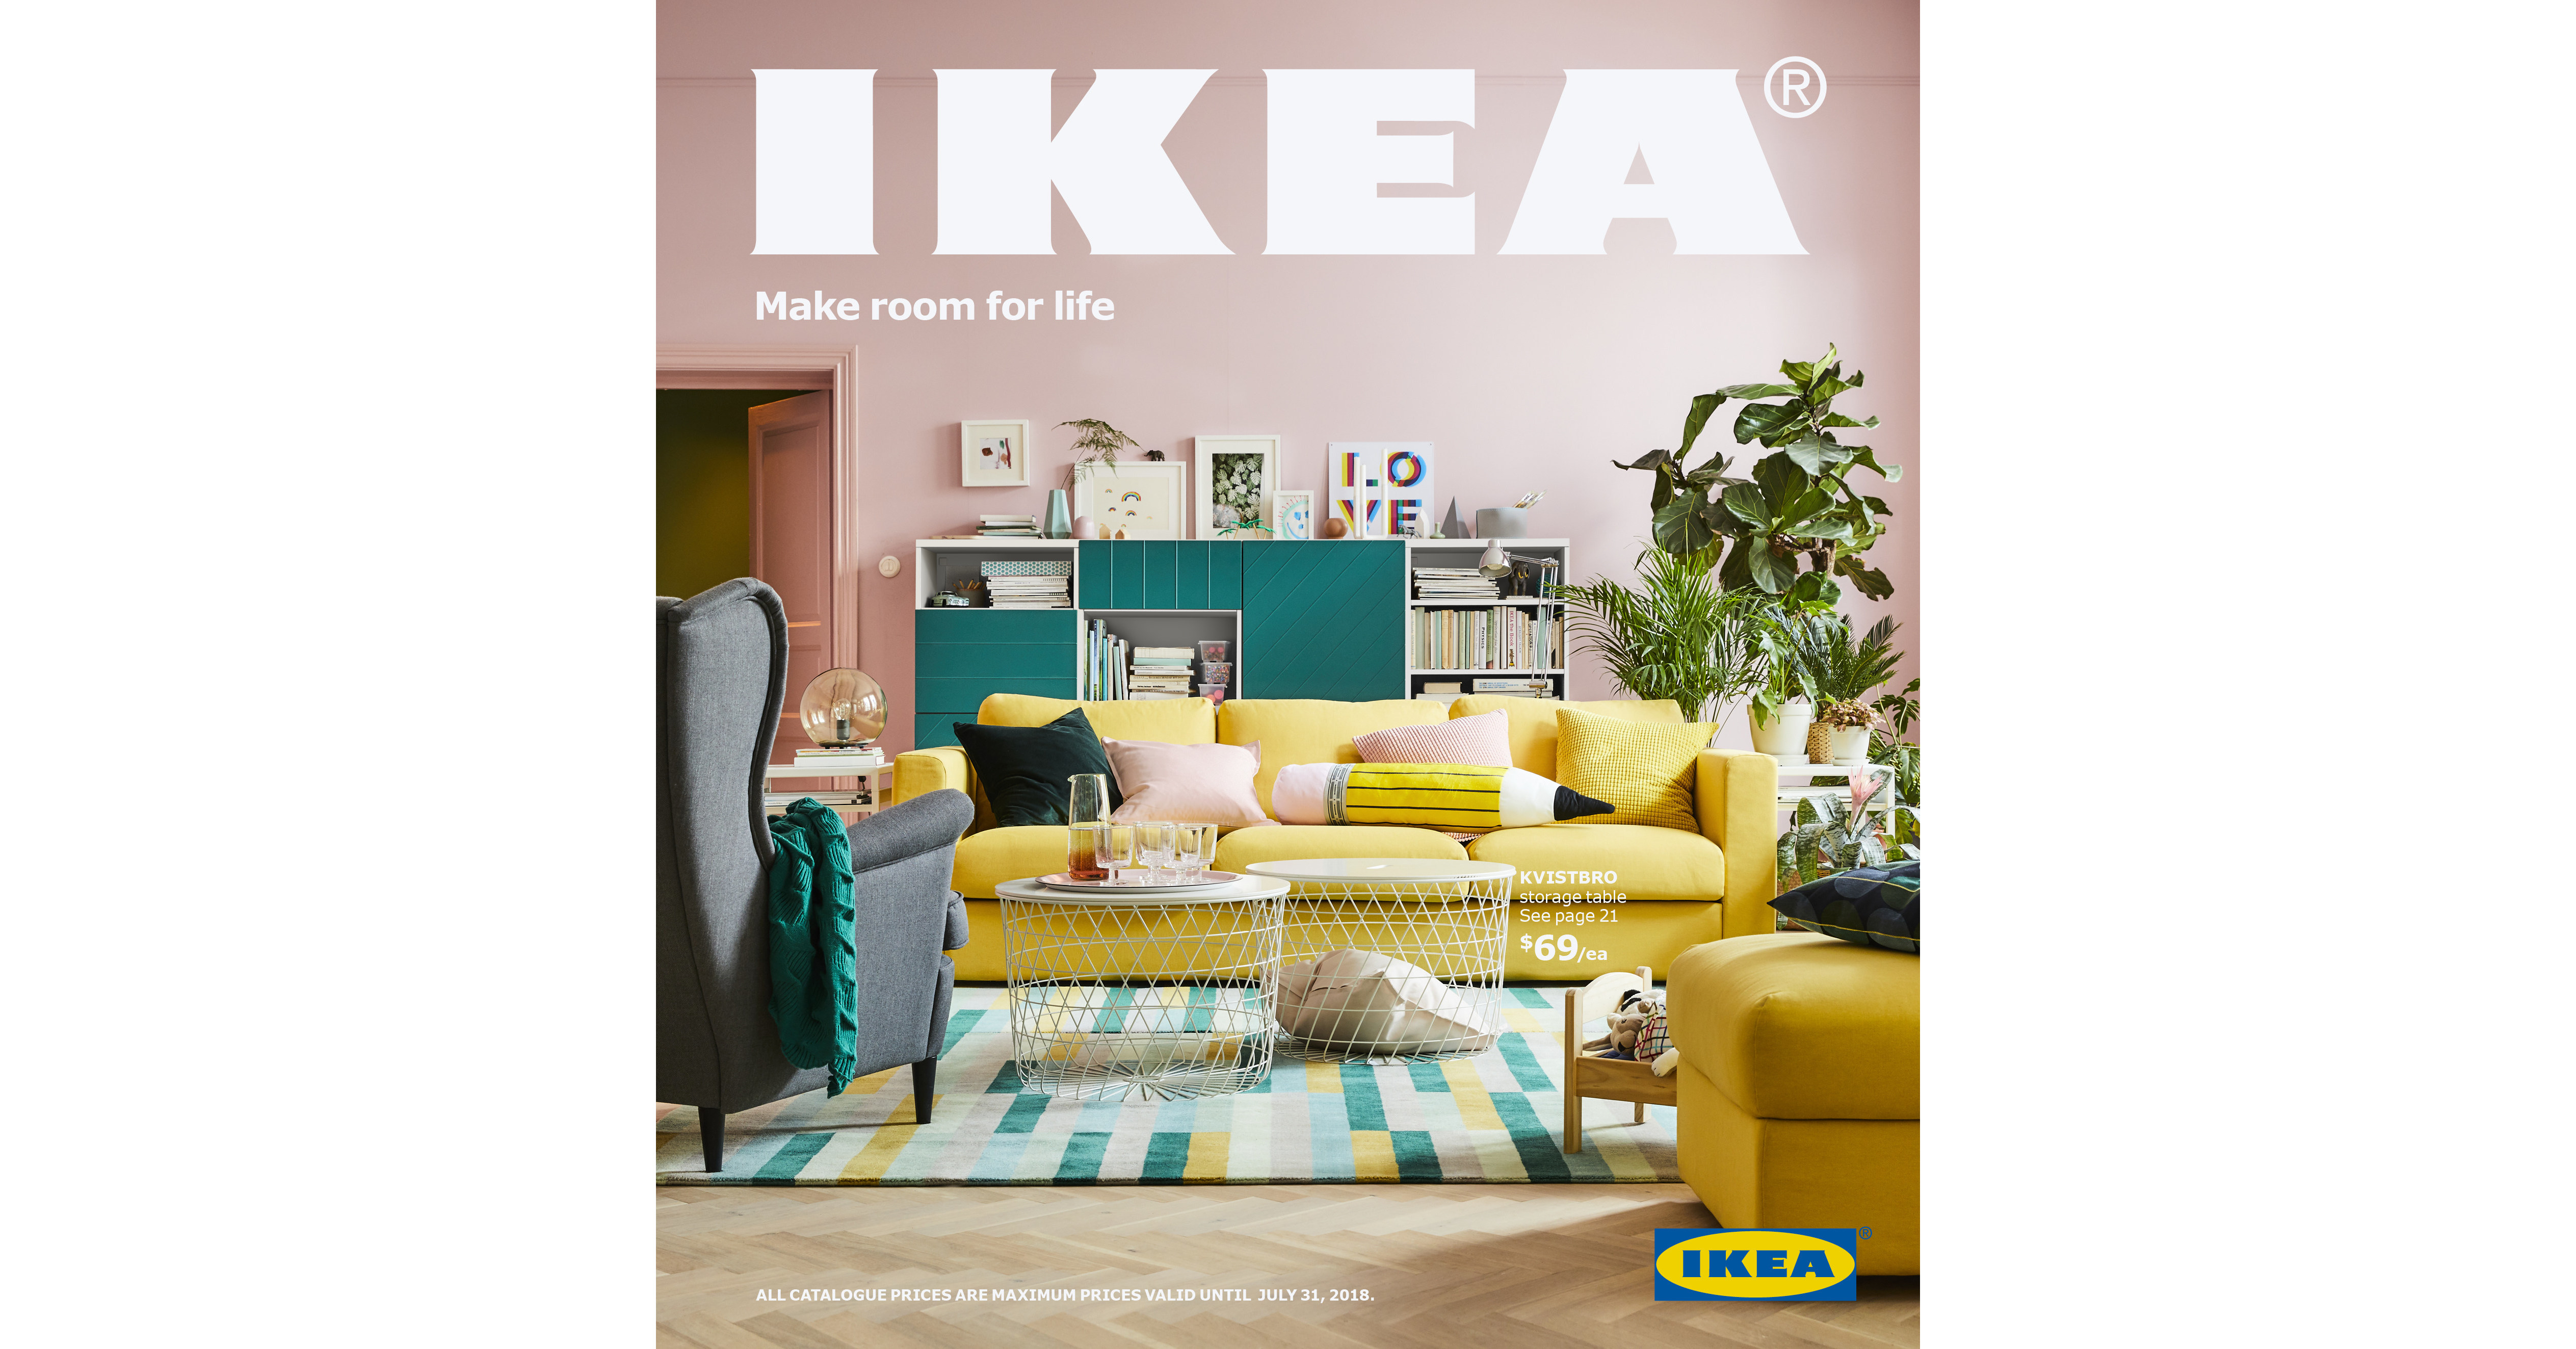 CNW 2018 IKEA Catalogue Set to Land in Mailboxes Across Canada